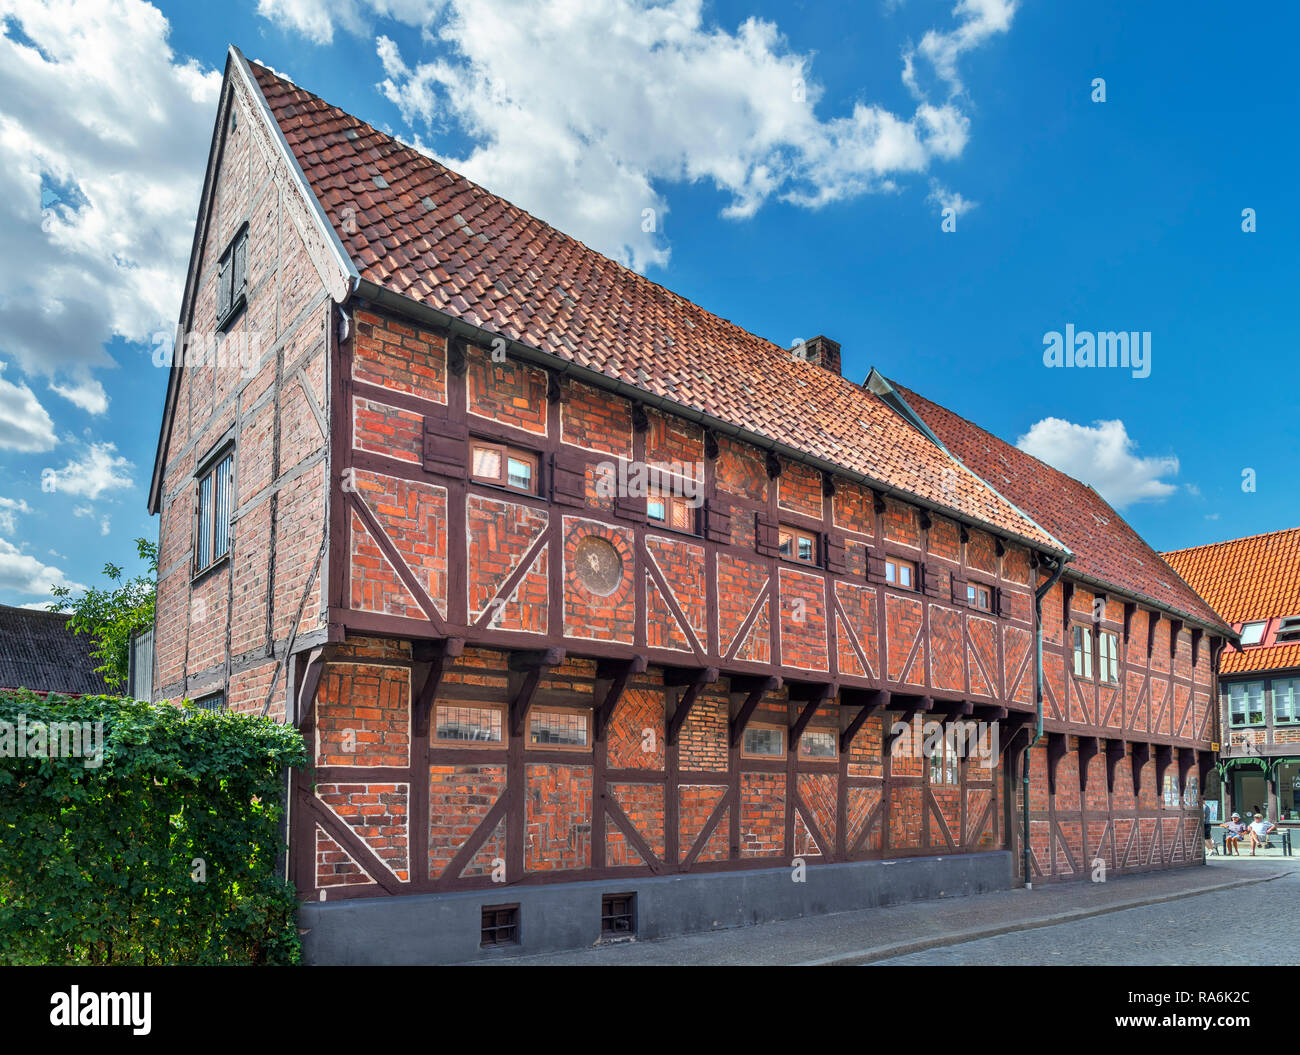 Pilgrändshuset, a half-timbered house dating from 1470 and the oldest such building in Scandinavia,Ystad, Sweden Stock Photo